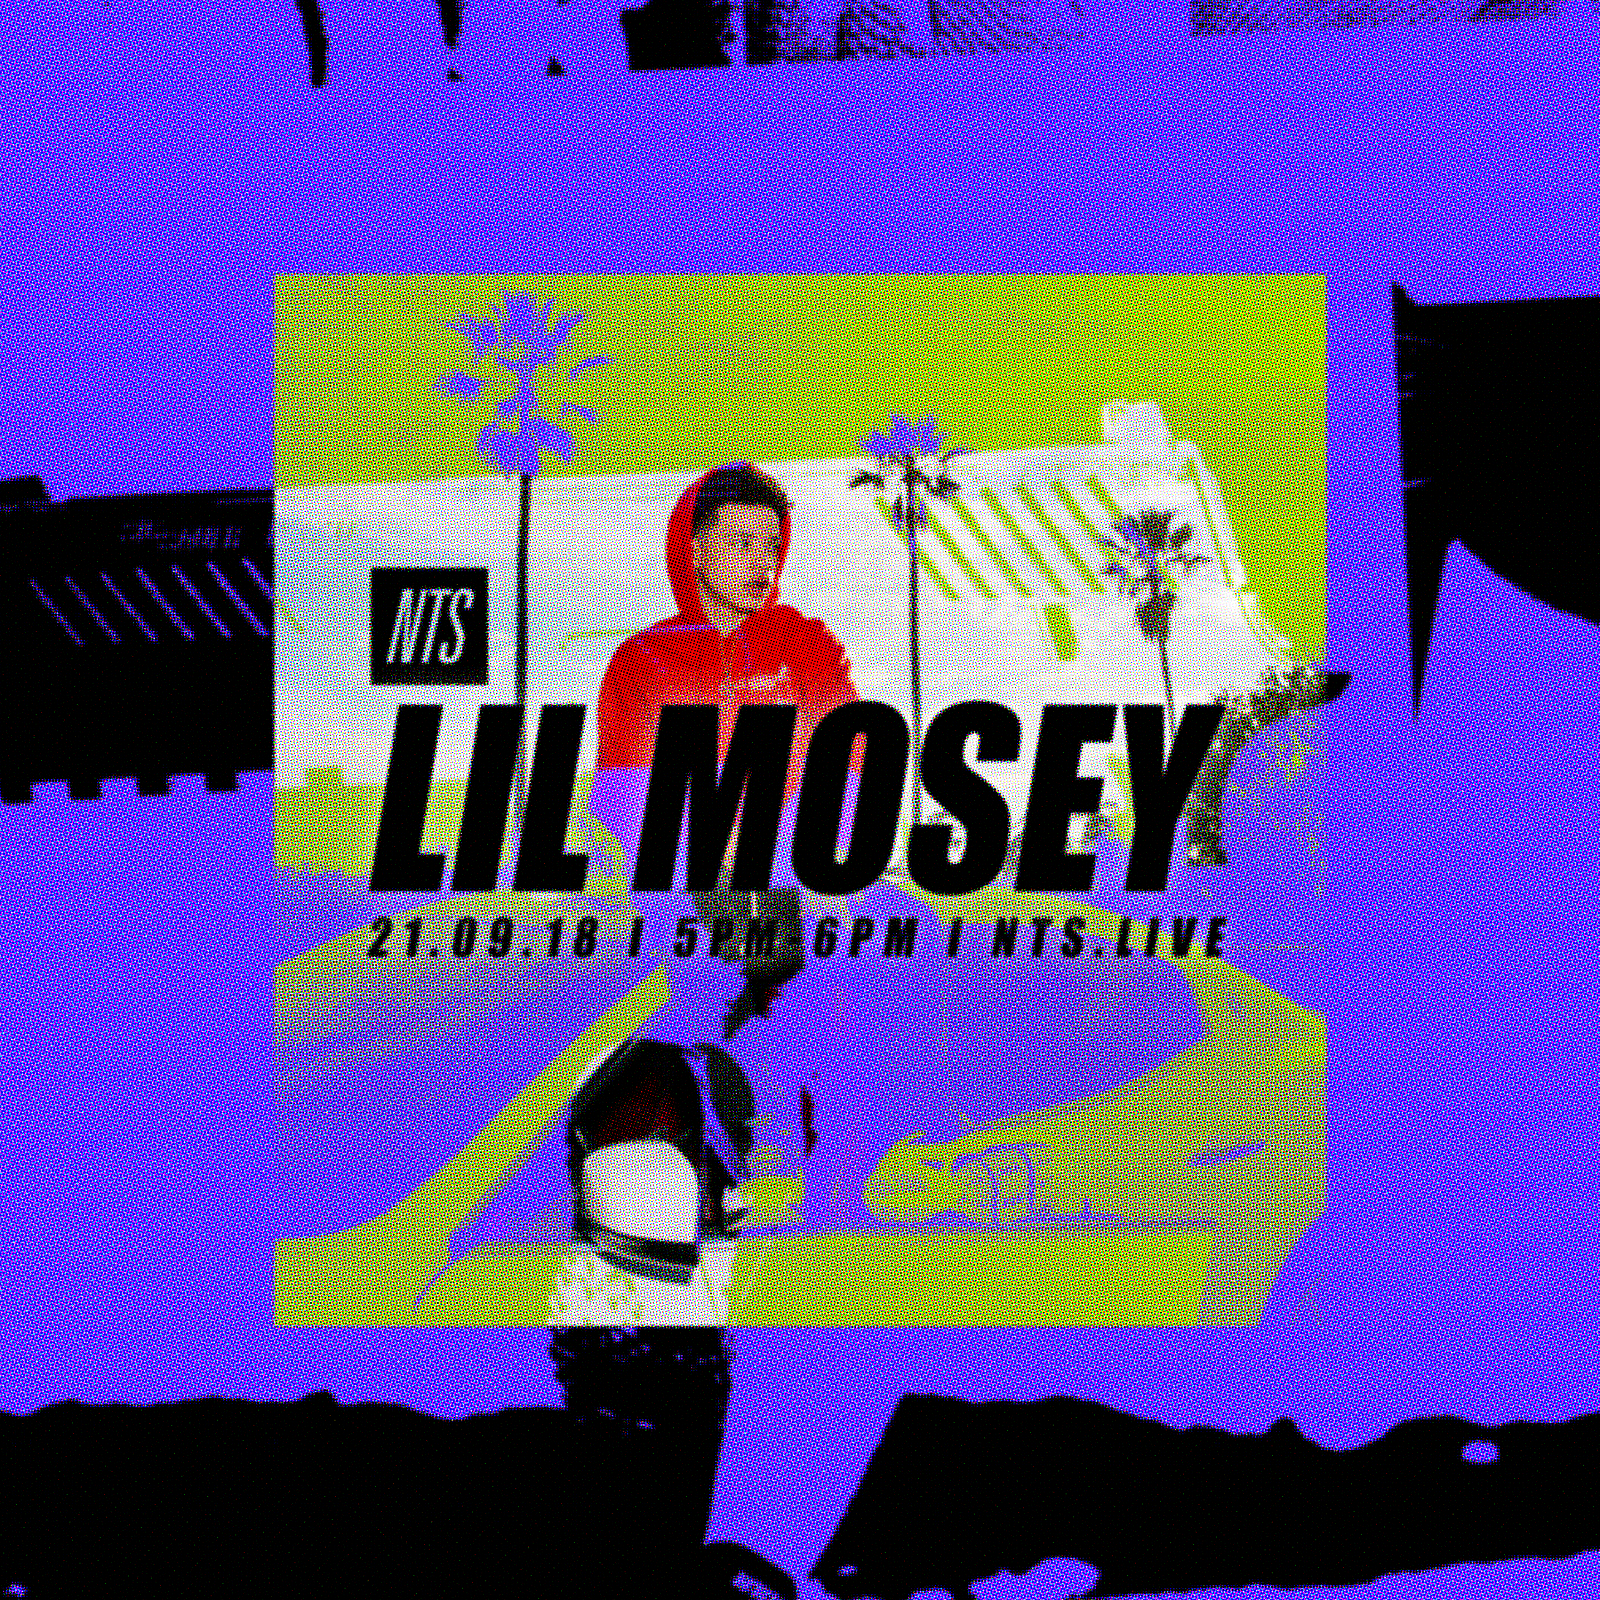 Lil Mosey NTS Artwork 21.09.18.png